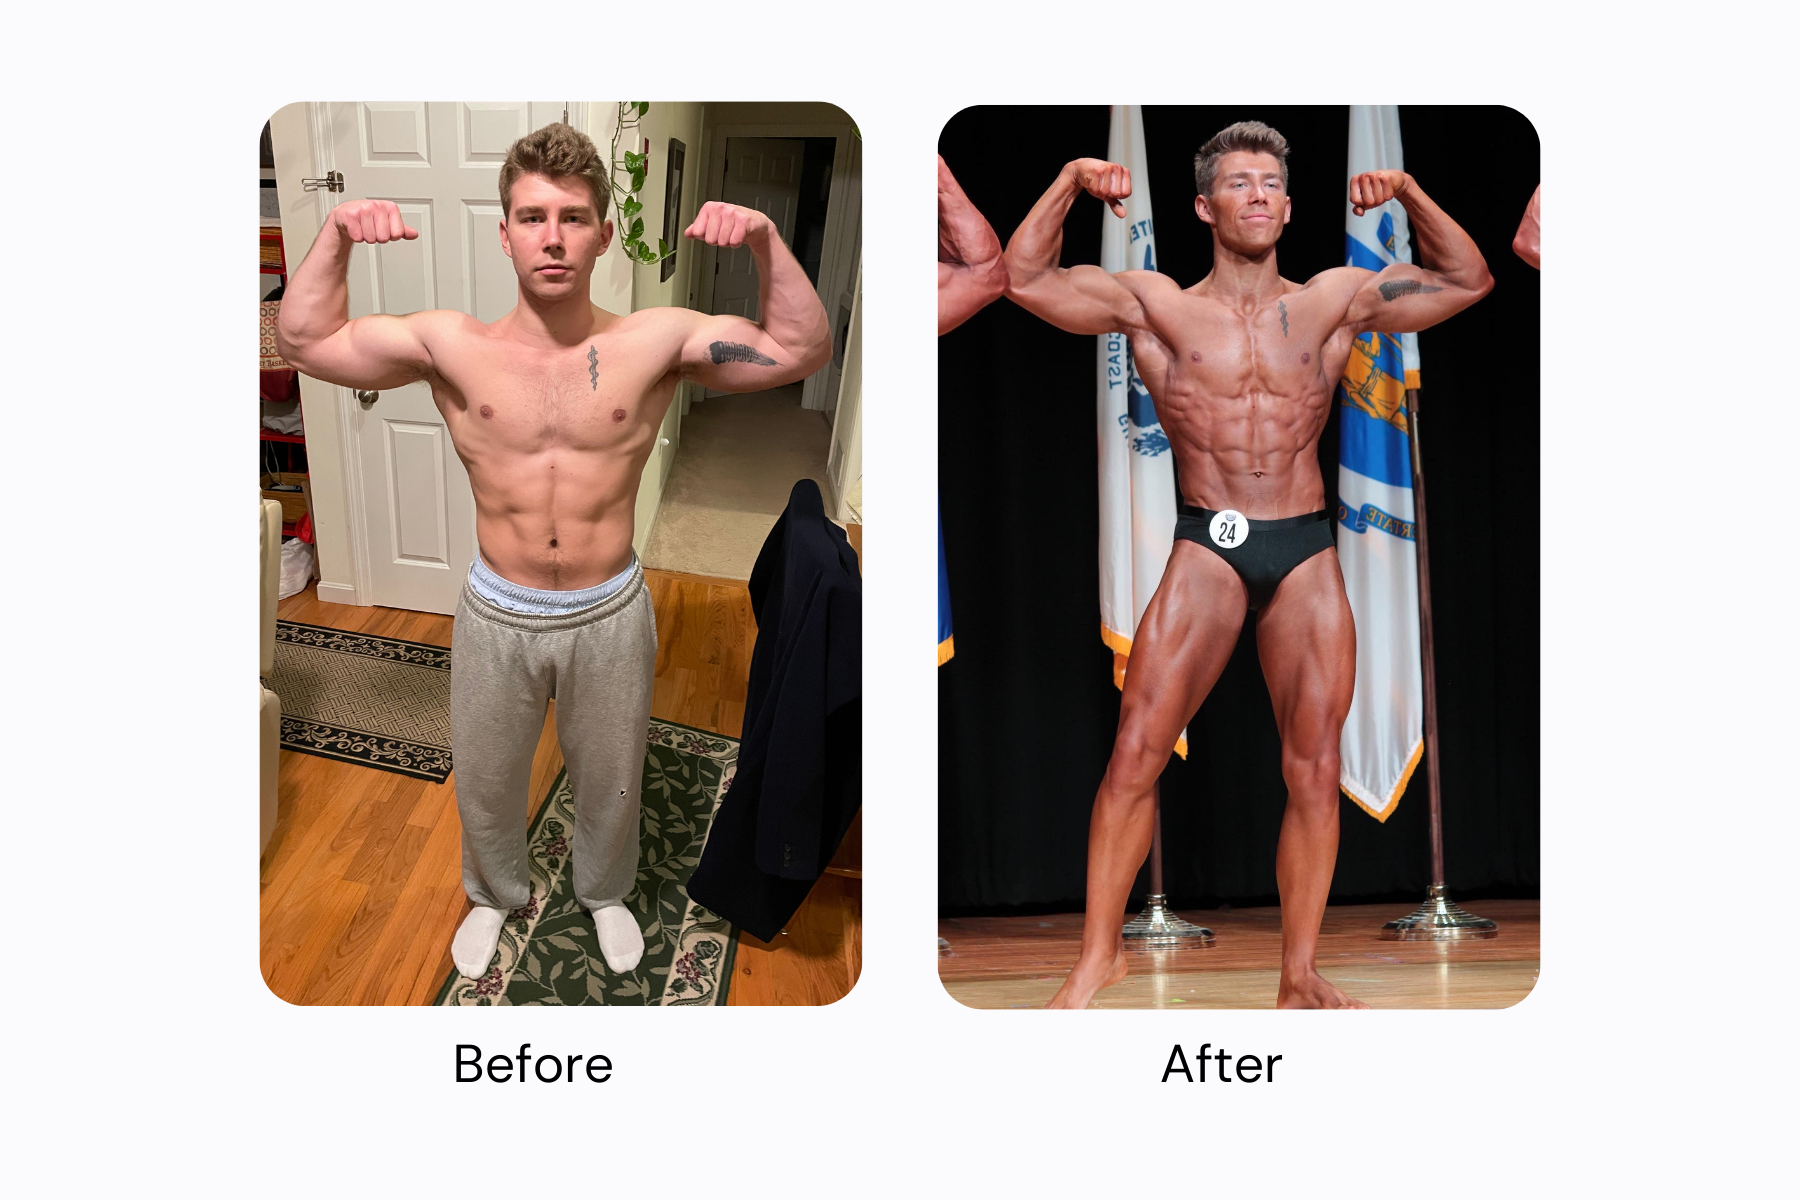 Max Rundlett, a 24-year-old amateur bodybuilder, used MacroFactor to lose 20 pounds in 16 weeks and place second in the classic physique division of a bodybuilding show. 